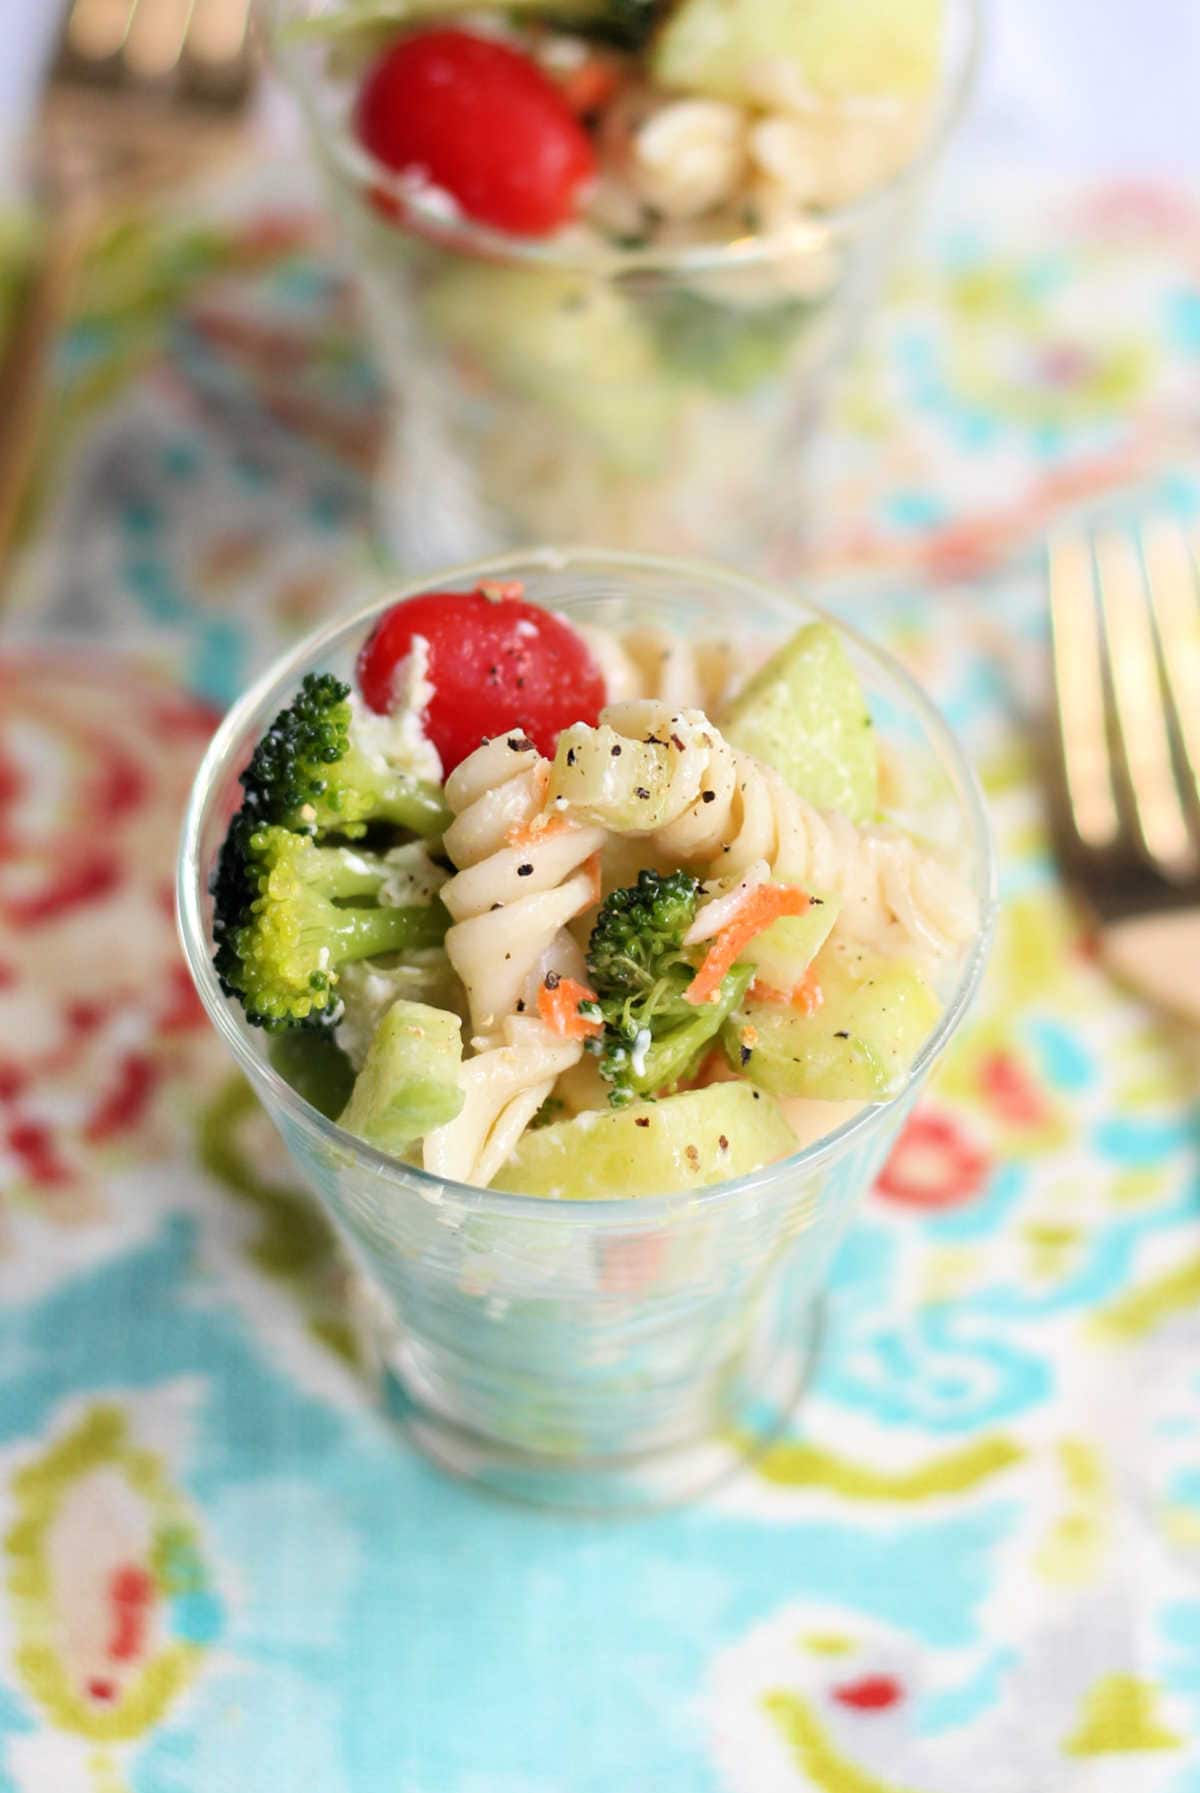 cold pasta salad with Italian dressing and gluten-free noodles in a glass cup